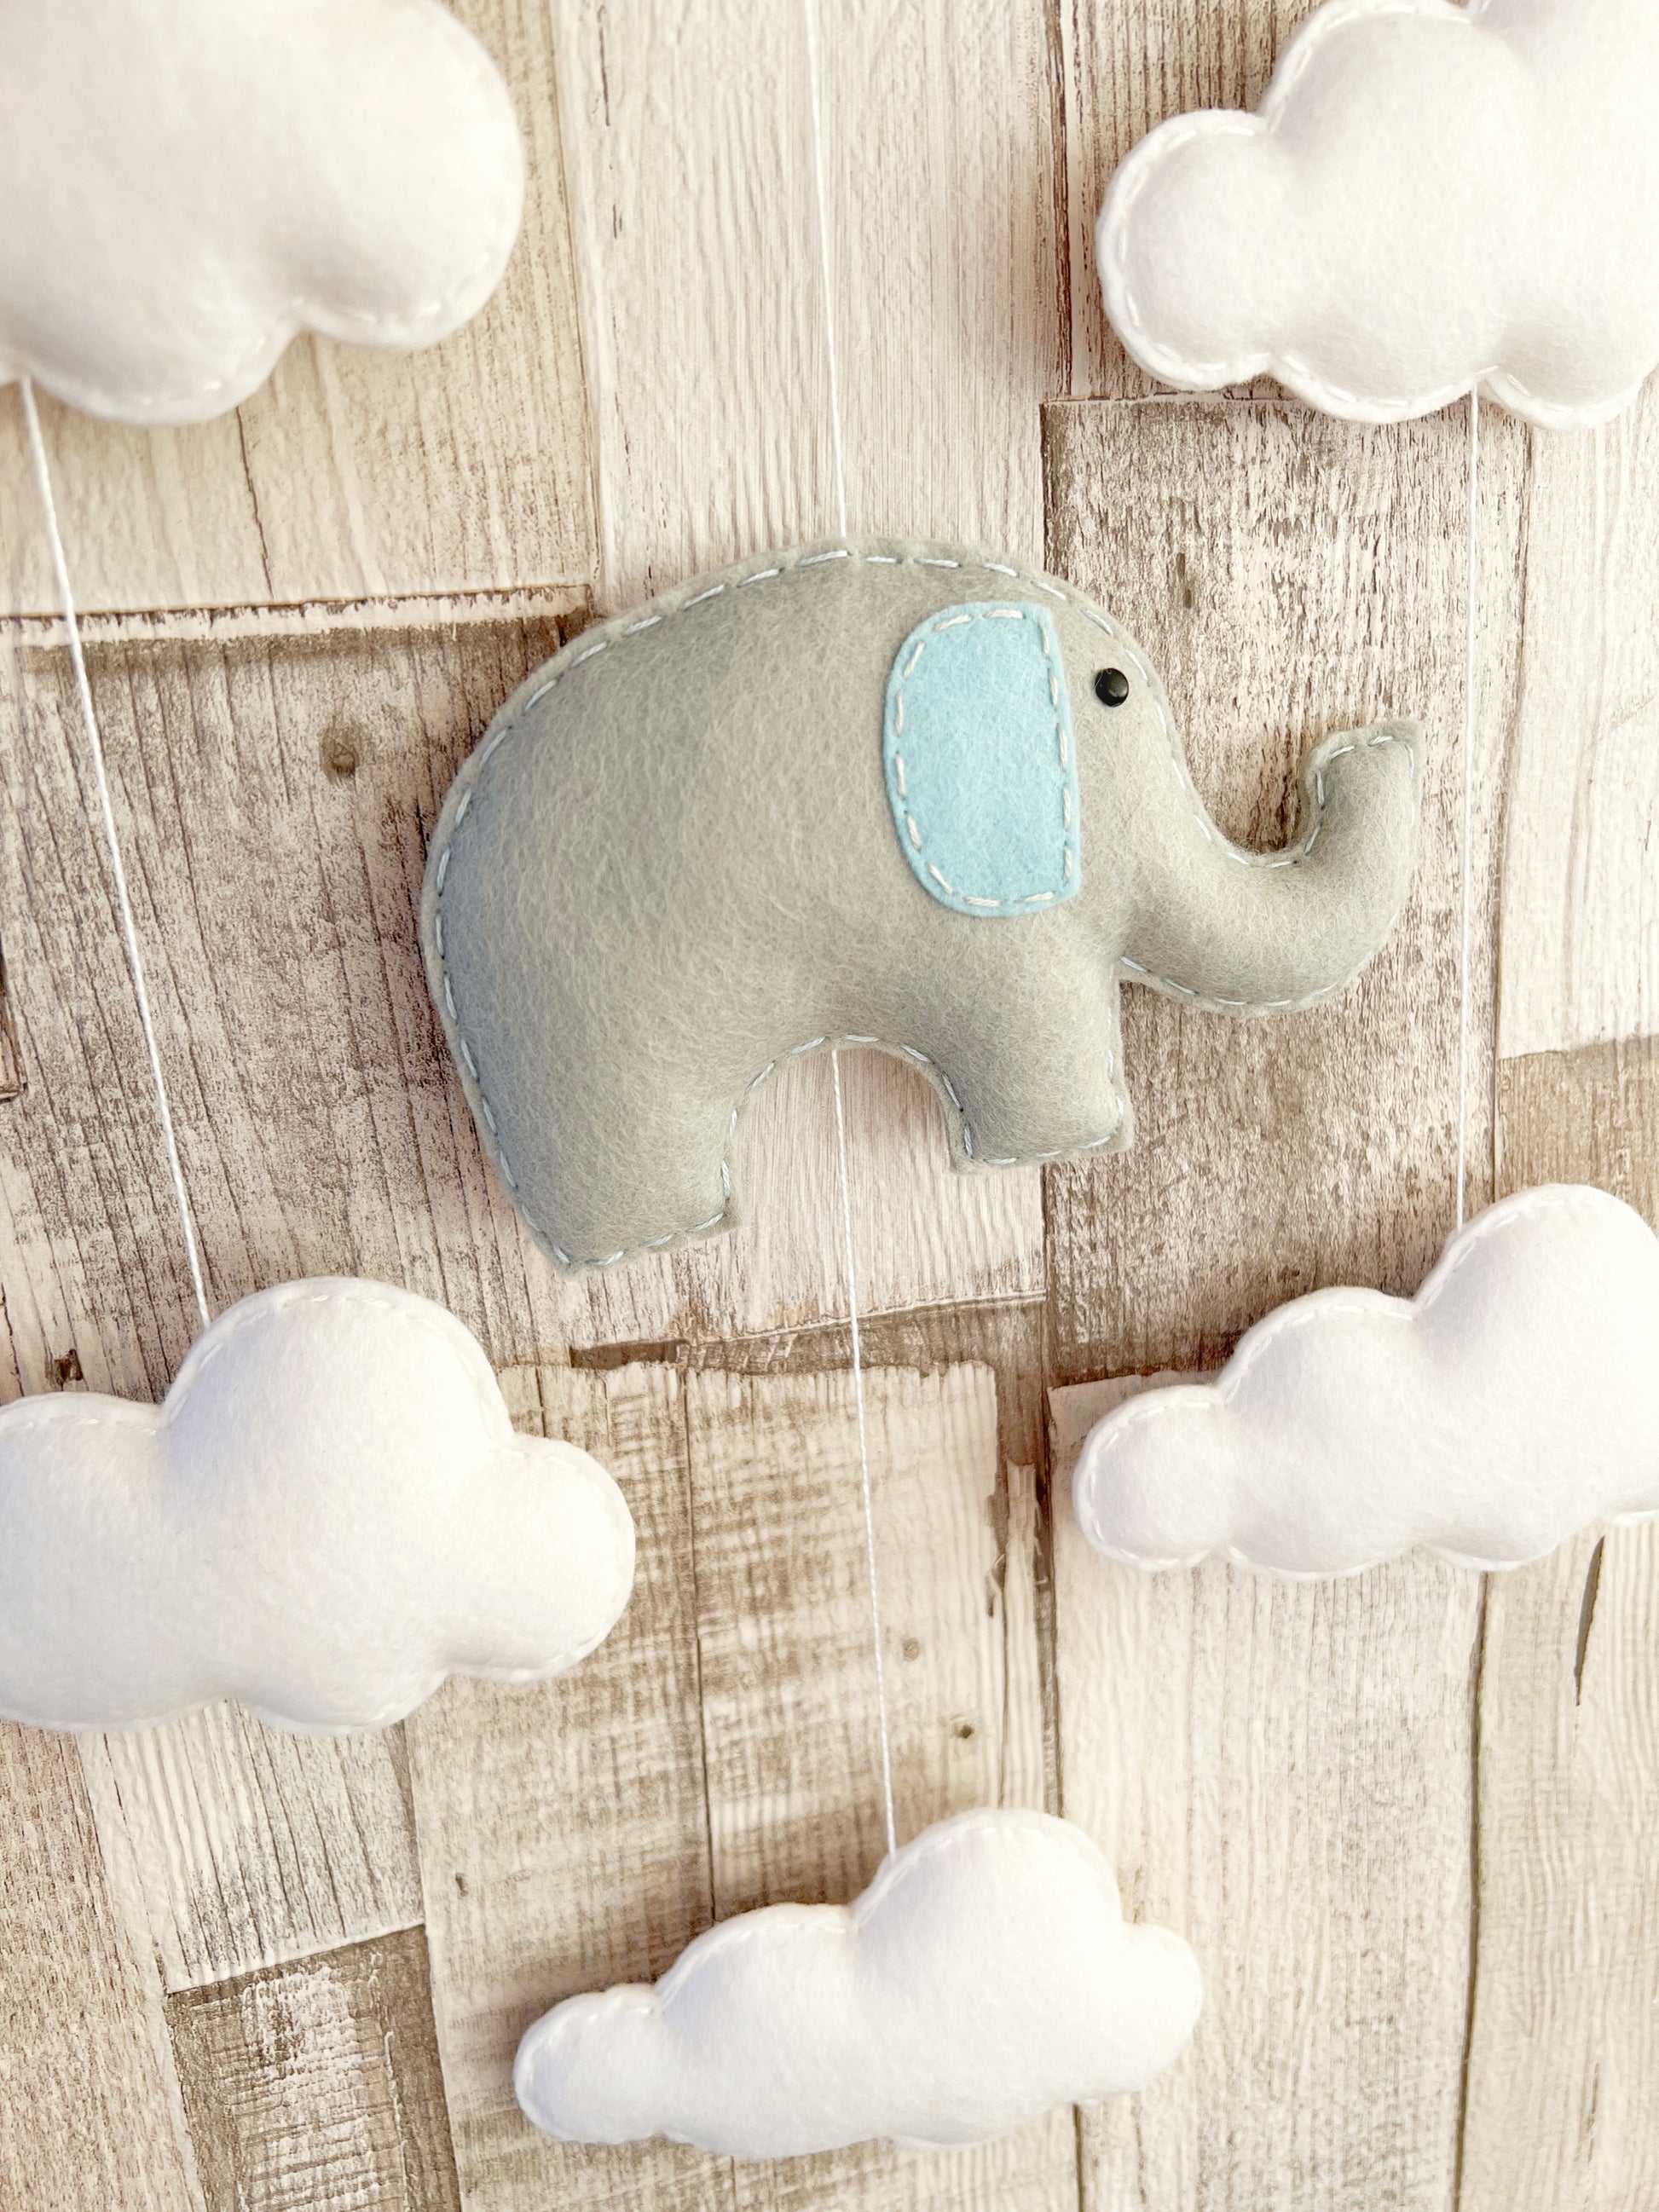 Dream Big Little One Elephant & Clouds Wall Mobile, Elephant Theme Nursery, Cloud Theme Nursery, Elephant Nursery Decor, Nursery Wall Art, Cloud Theme Nursery, Grey & White Nursery Decor, Neutral Nursery Decor, White Cloud Theme Nursery, Baby Mobile, Nursery Mobile, Baby Room Decoration, Elephant Nursery Mobile